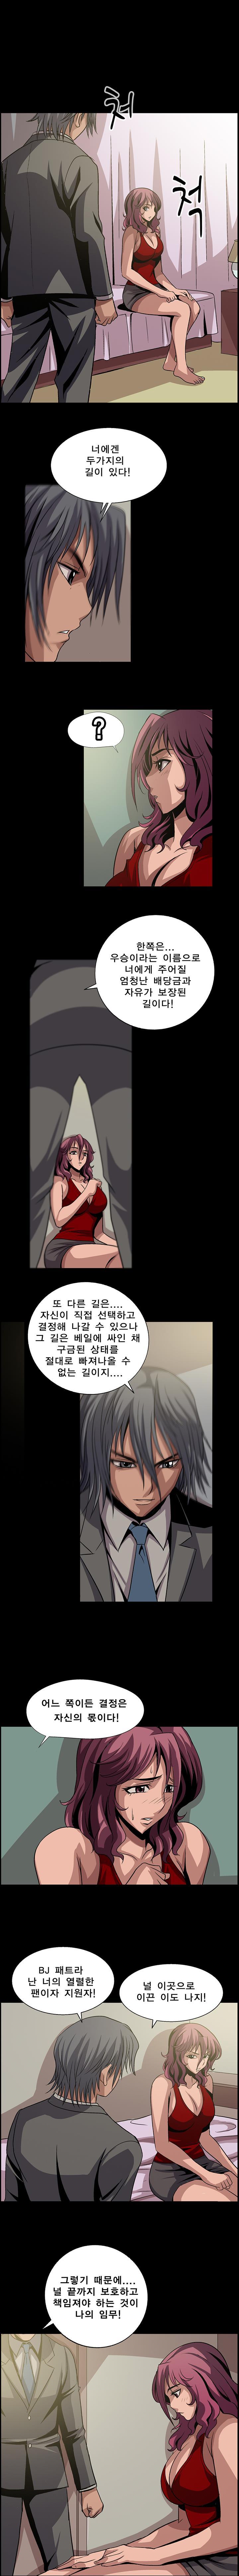 BJ Kidnapping Case Raw - Chapter 24 Page 4